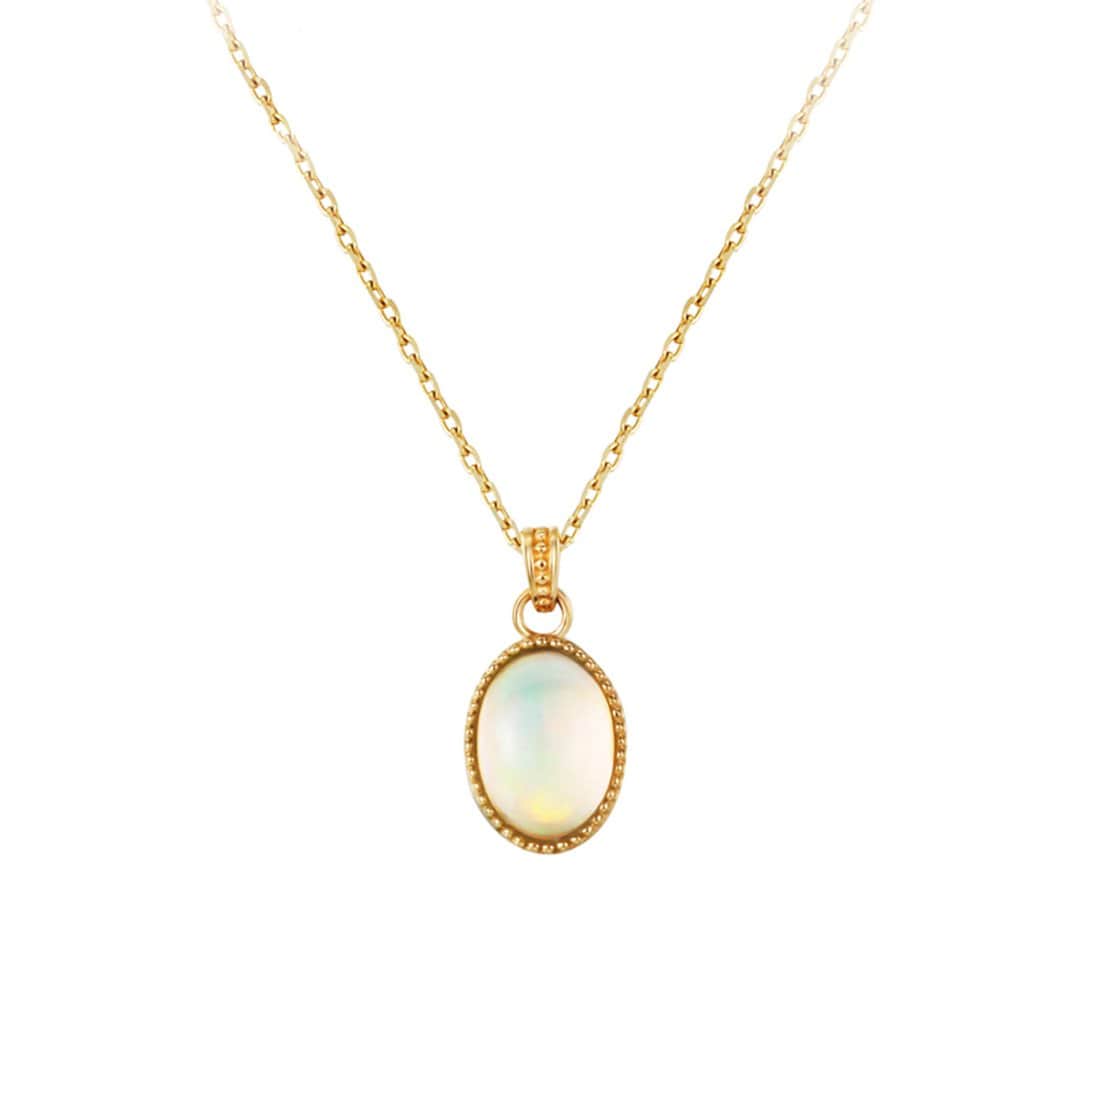 FANCIME "Maria" Natural Opal Solid 14K Yellow Gold Necklace Main